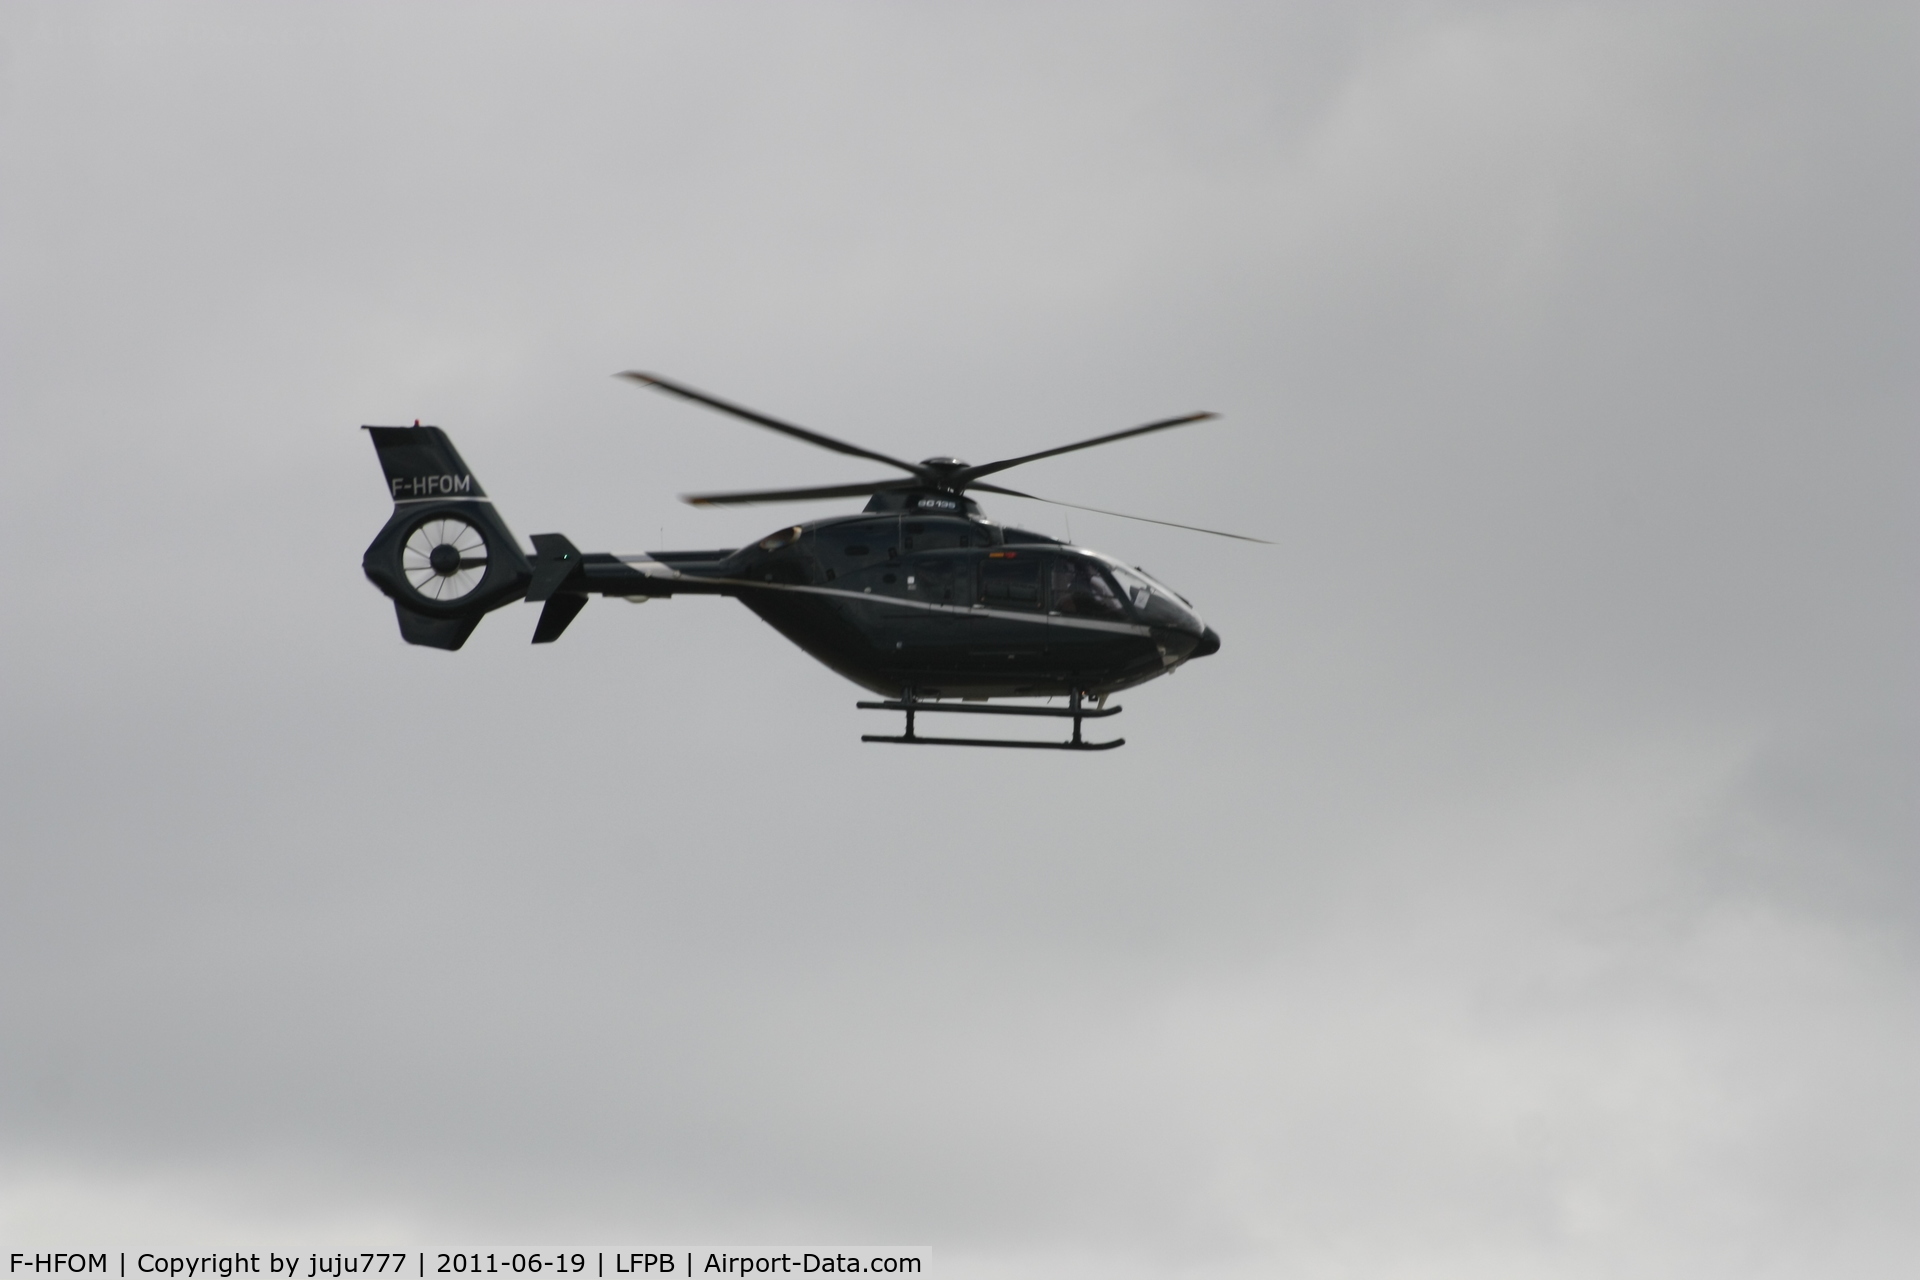 F-HFOM, 2007 Eurocopter EC-135T-2+ C/N 0581, on transit at Le Bourget